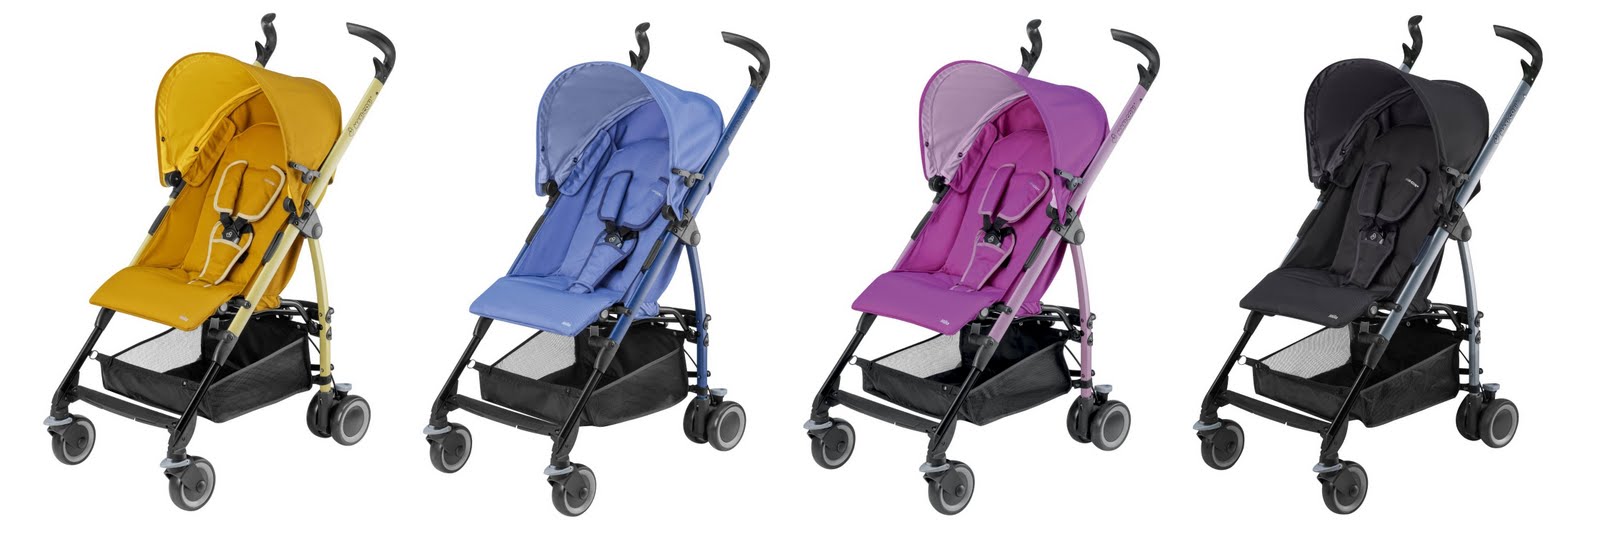 Ezel Veroveraar lippen Thanks, Mail Carrier: Checking Our List #17: Maxi-Cosi Mila Stroller  {Review & Giveaway}